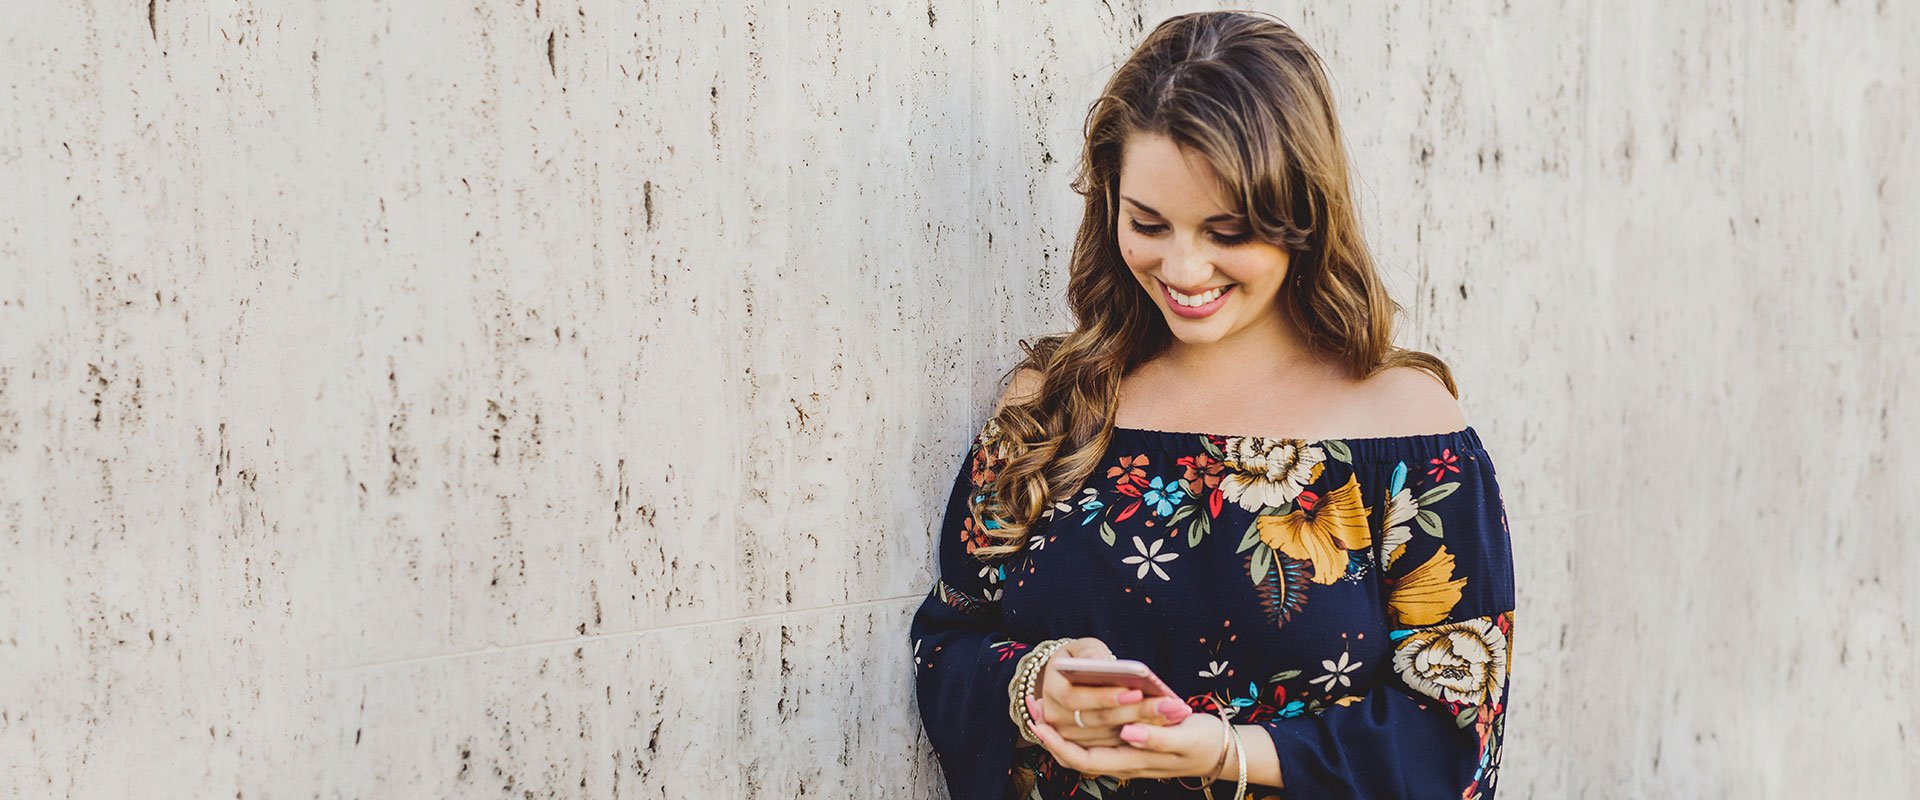 Free Dating symbolized by a single woman using eharmony and smiling in her smartphone